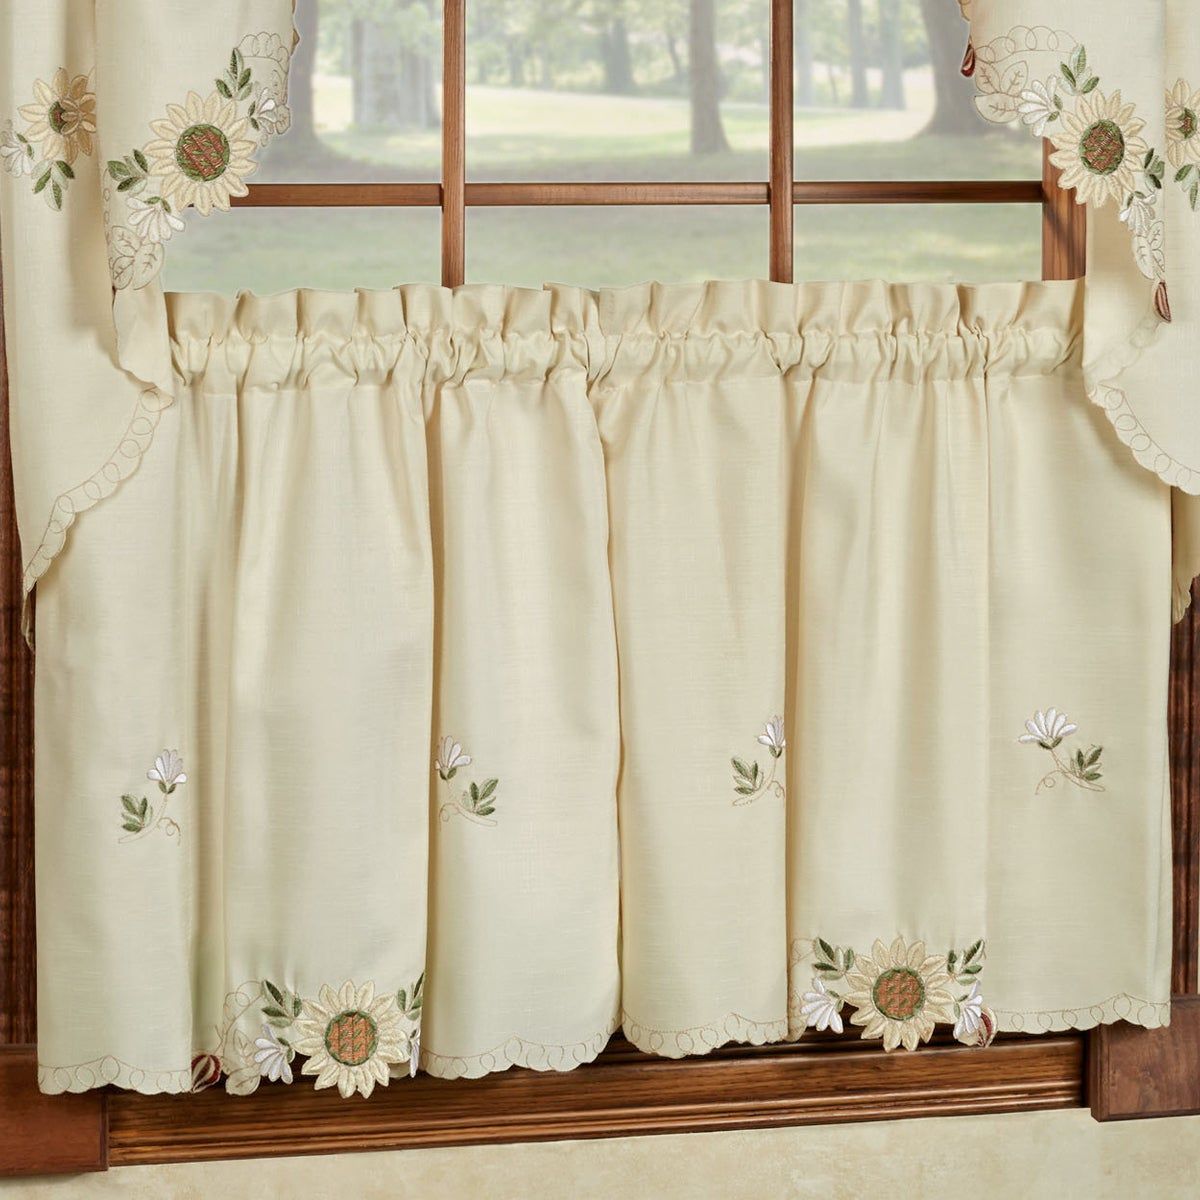 Embroidered Sunflower Kitchen Curtains Separates  Tier, Swag And Valance  Options Pertaining To Sunflower Cottage Kitchen Curtain Tier And Valance Sets (View 6 of 20)